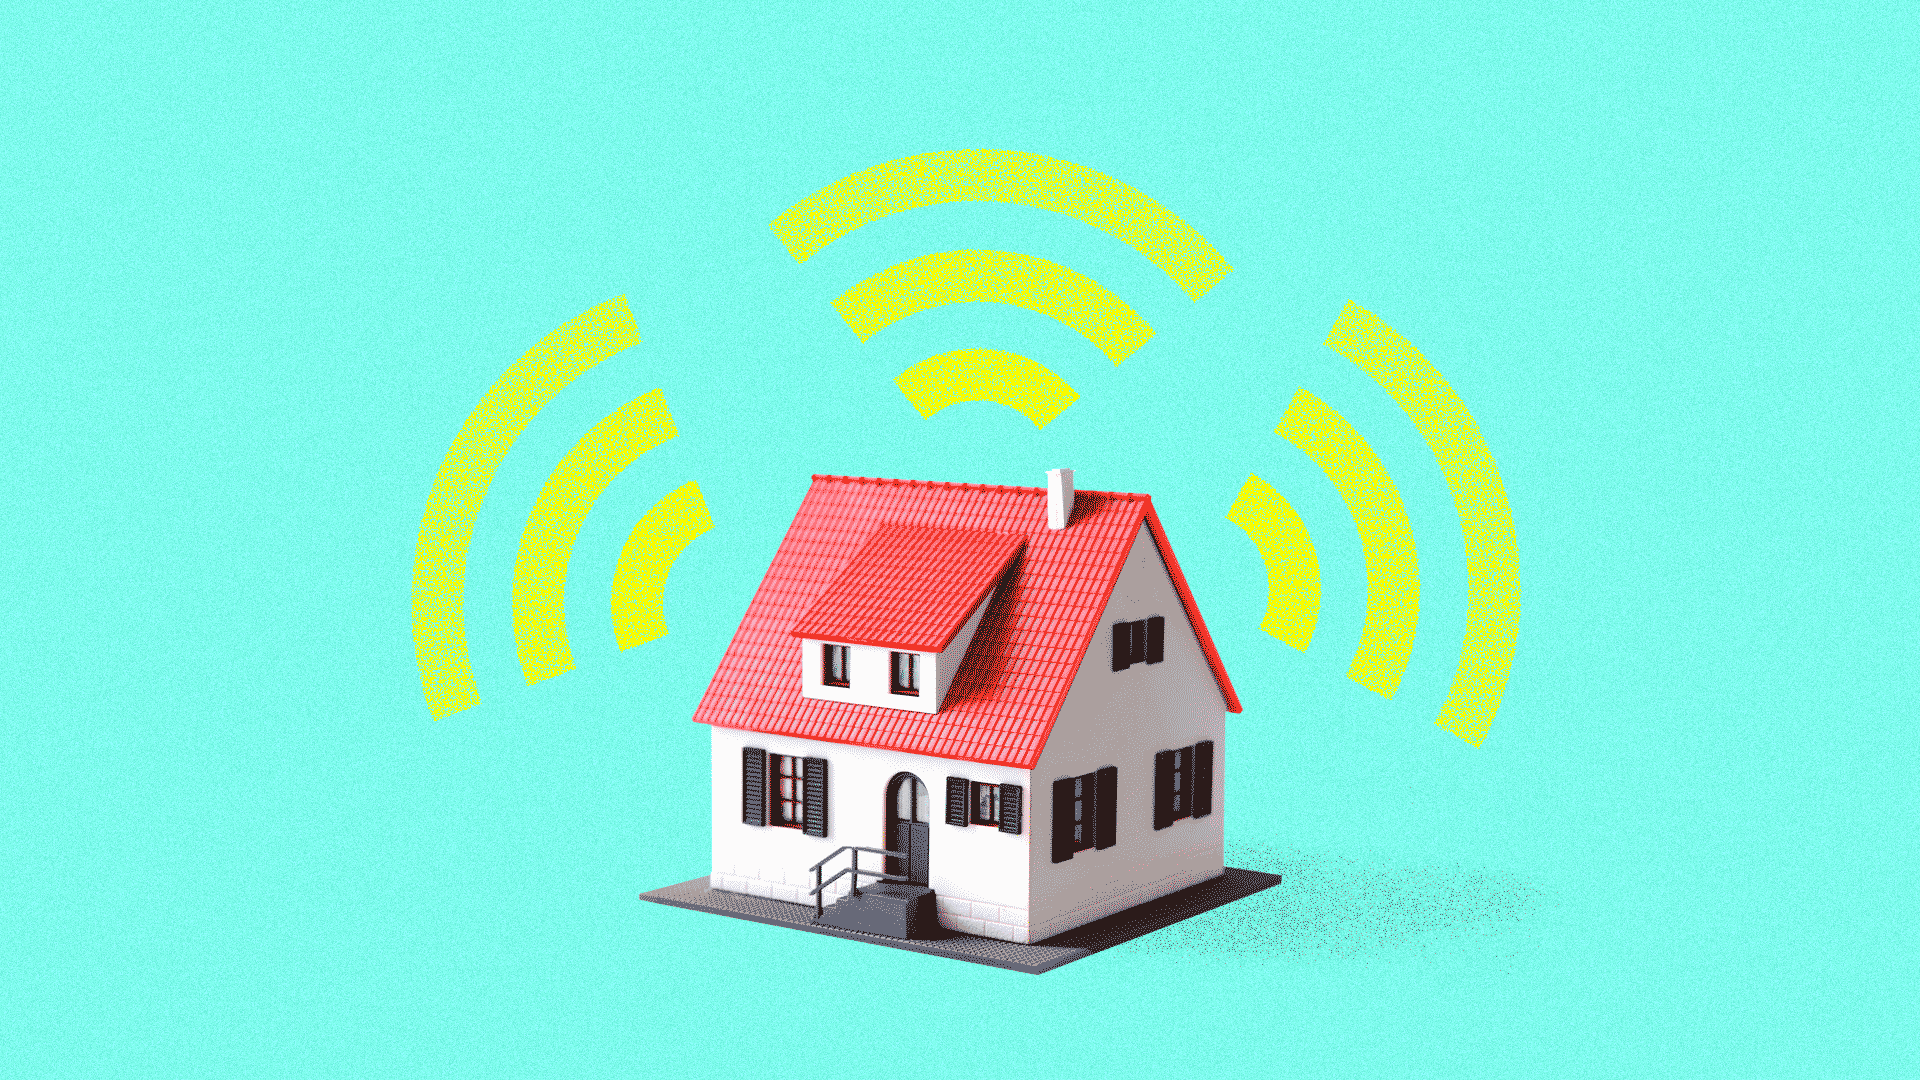 A small house emanating wifi signals